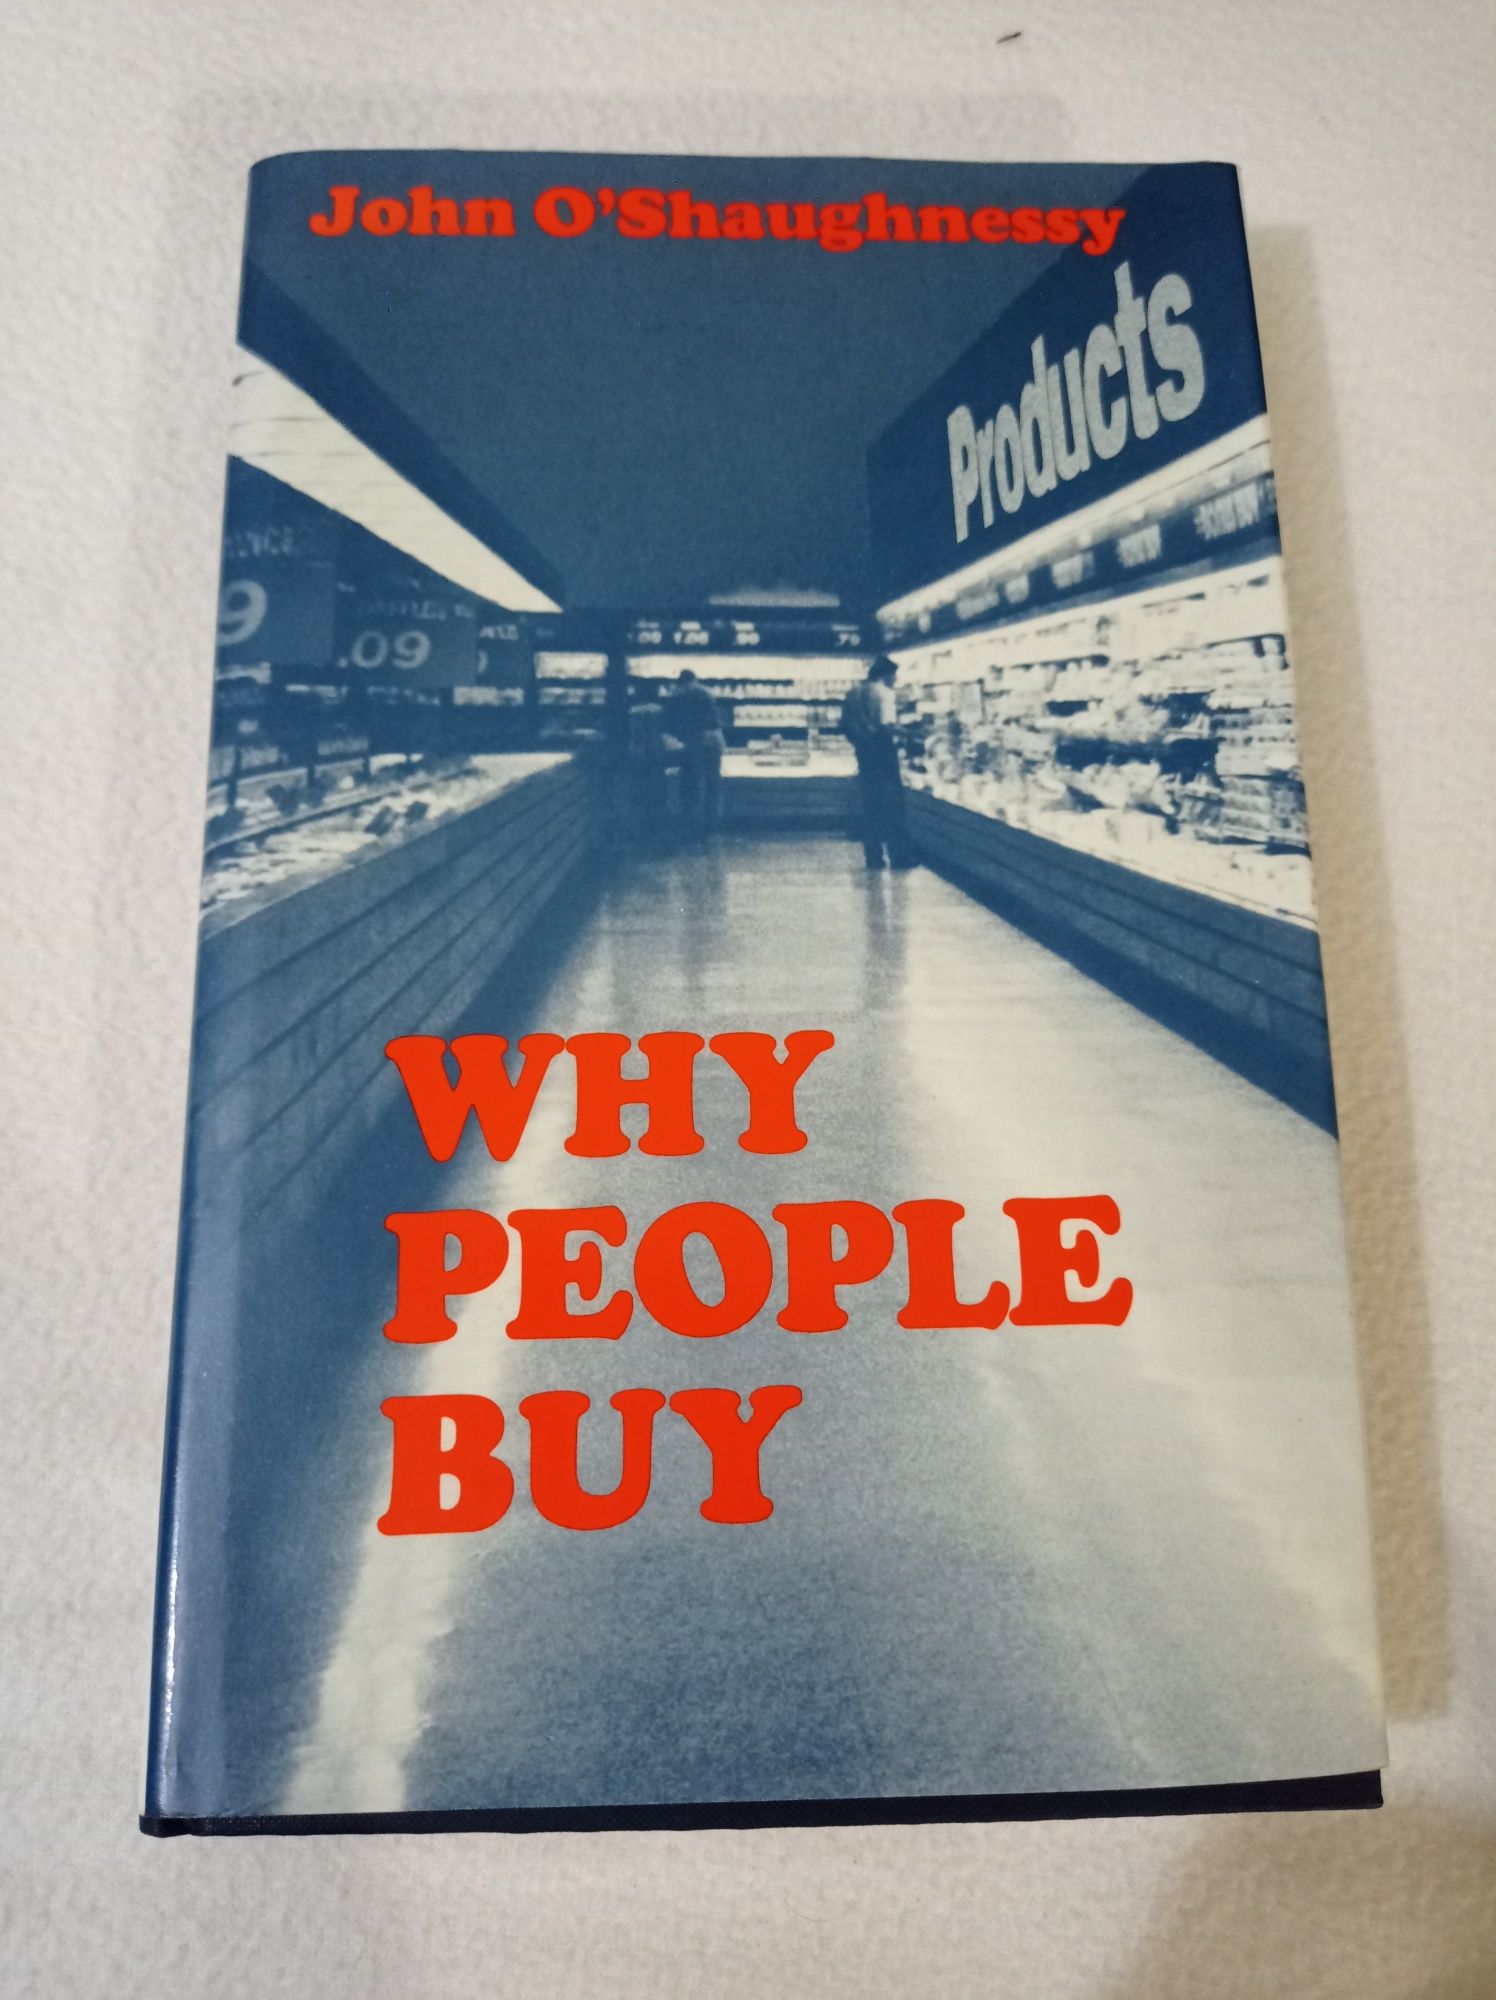 Why people buy - John O'Shaughnessy